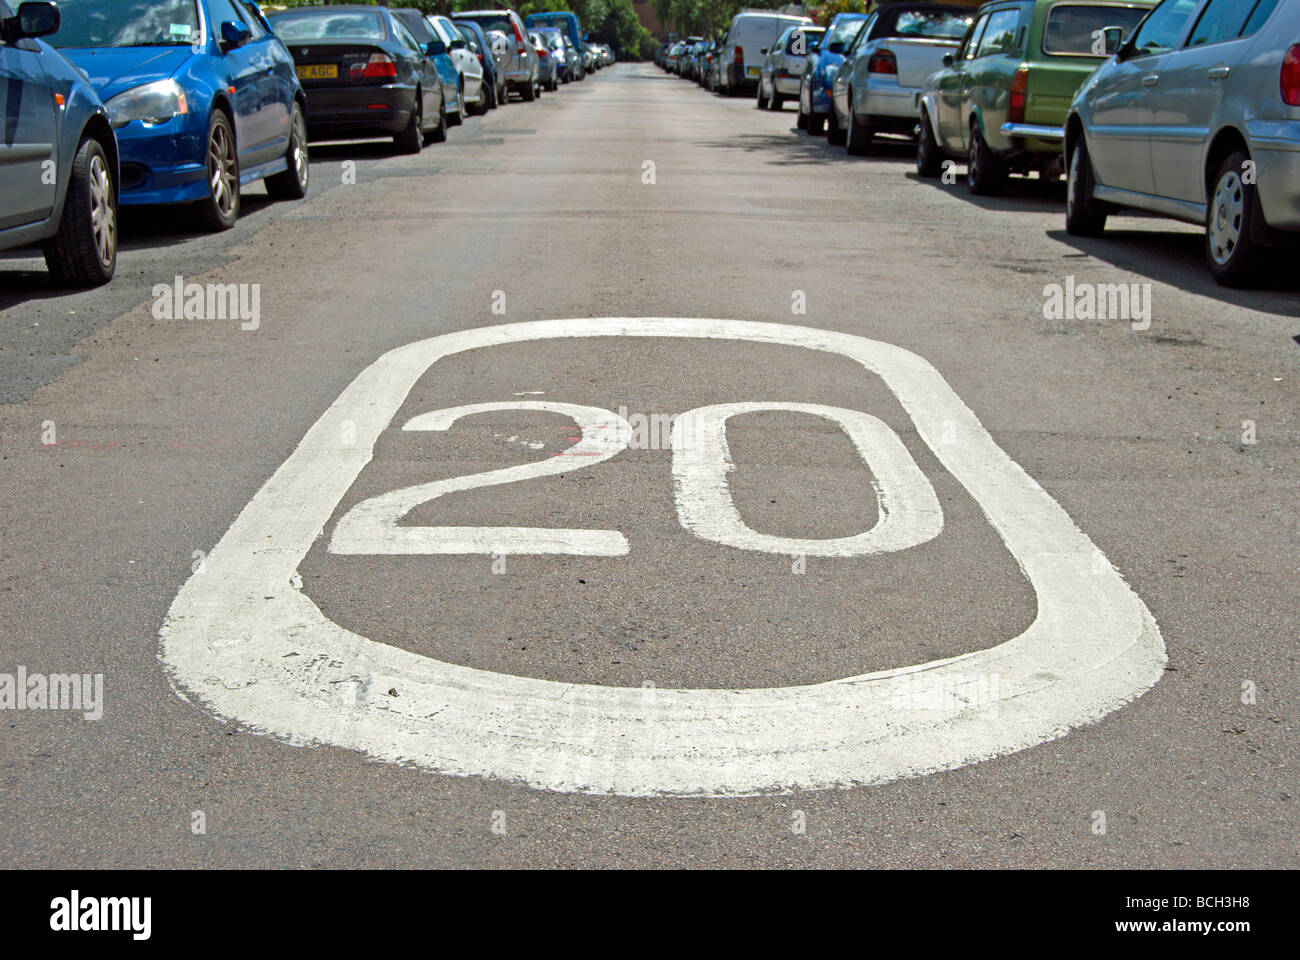 british road markings indicating a 20 miles per hour speed limit Stock Photo